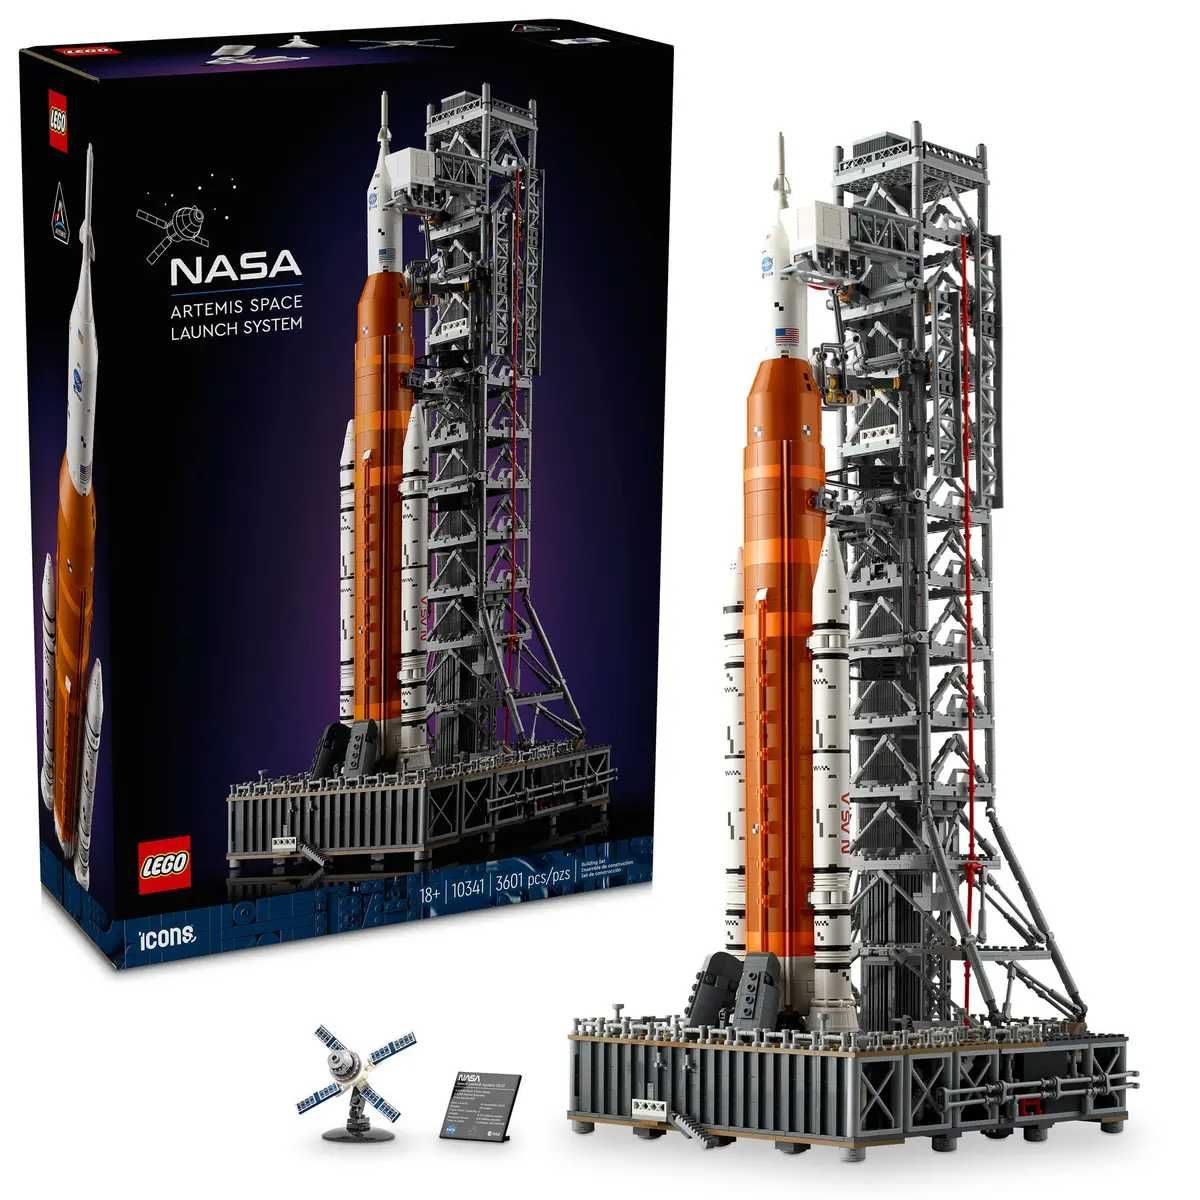 Lego 10341 Icons Artemis Space Launch System